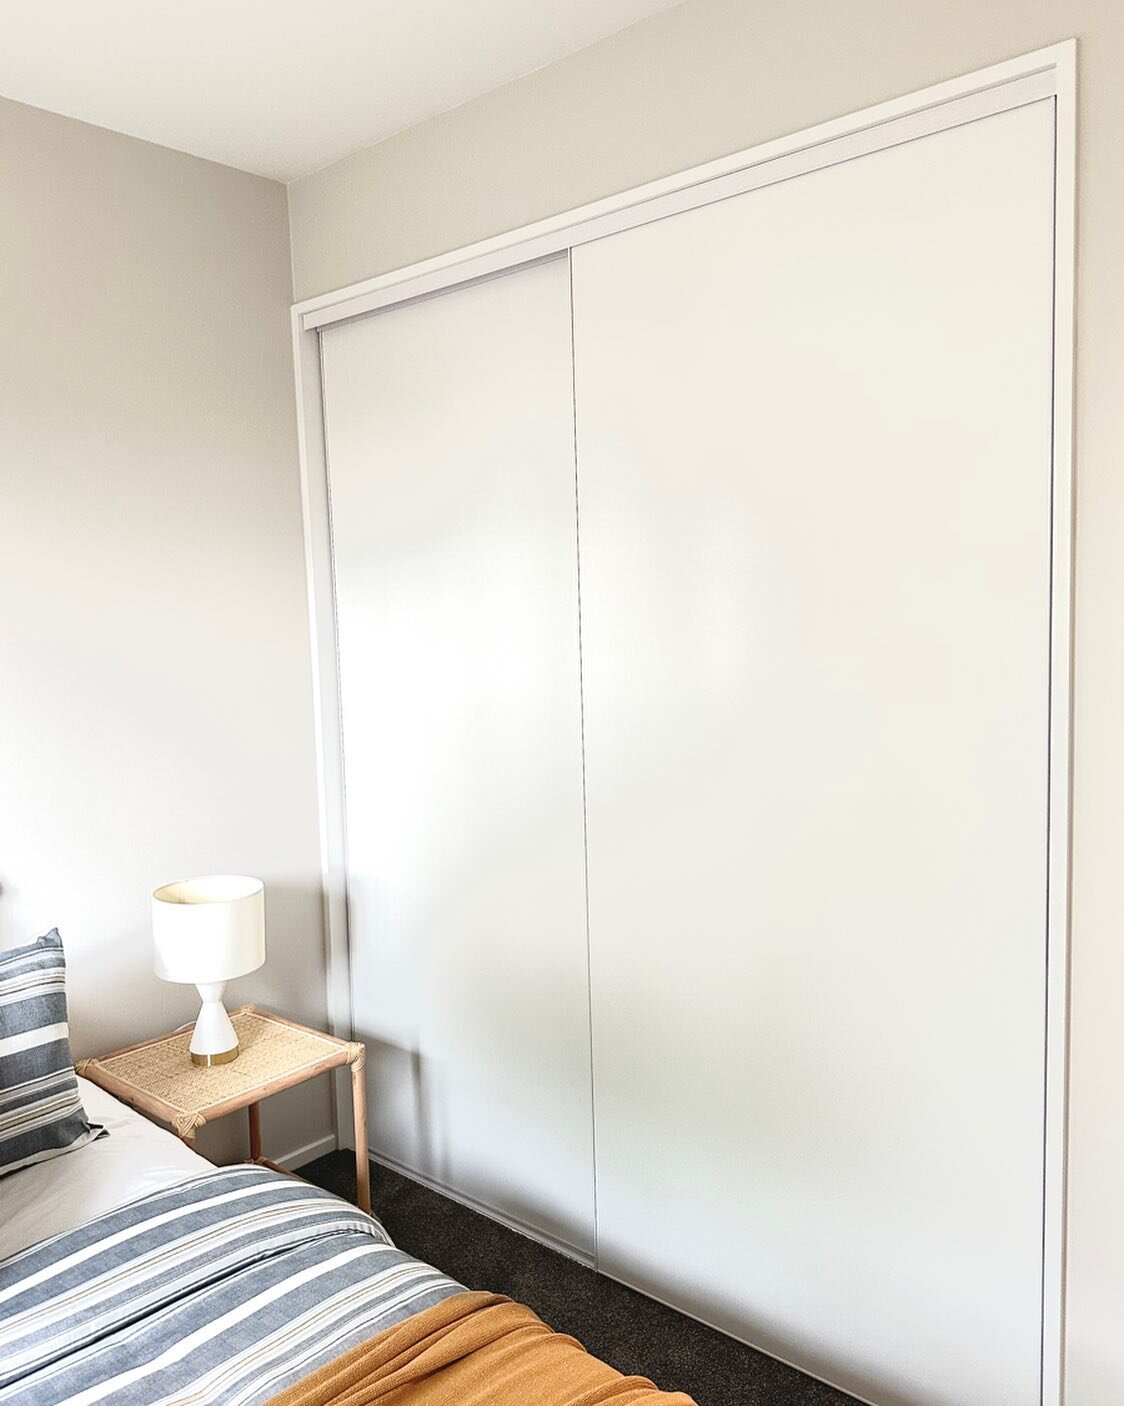 Discover our slimline made-to-size wardrobe sliding doors. Durable 9mm MDF core melamine finish door panels with ultra smooth top and bottom rollers.

Quick turnaround: 7 - 14 working days 
Nationwide delivery 
5 Year Warranty